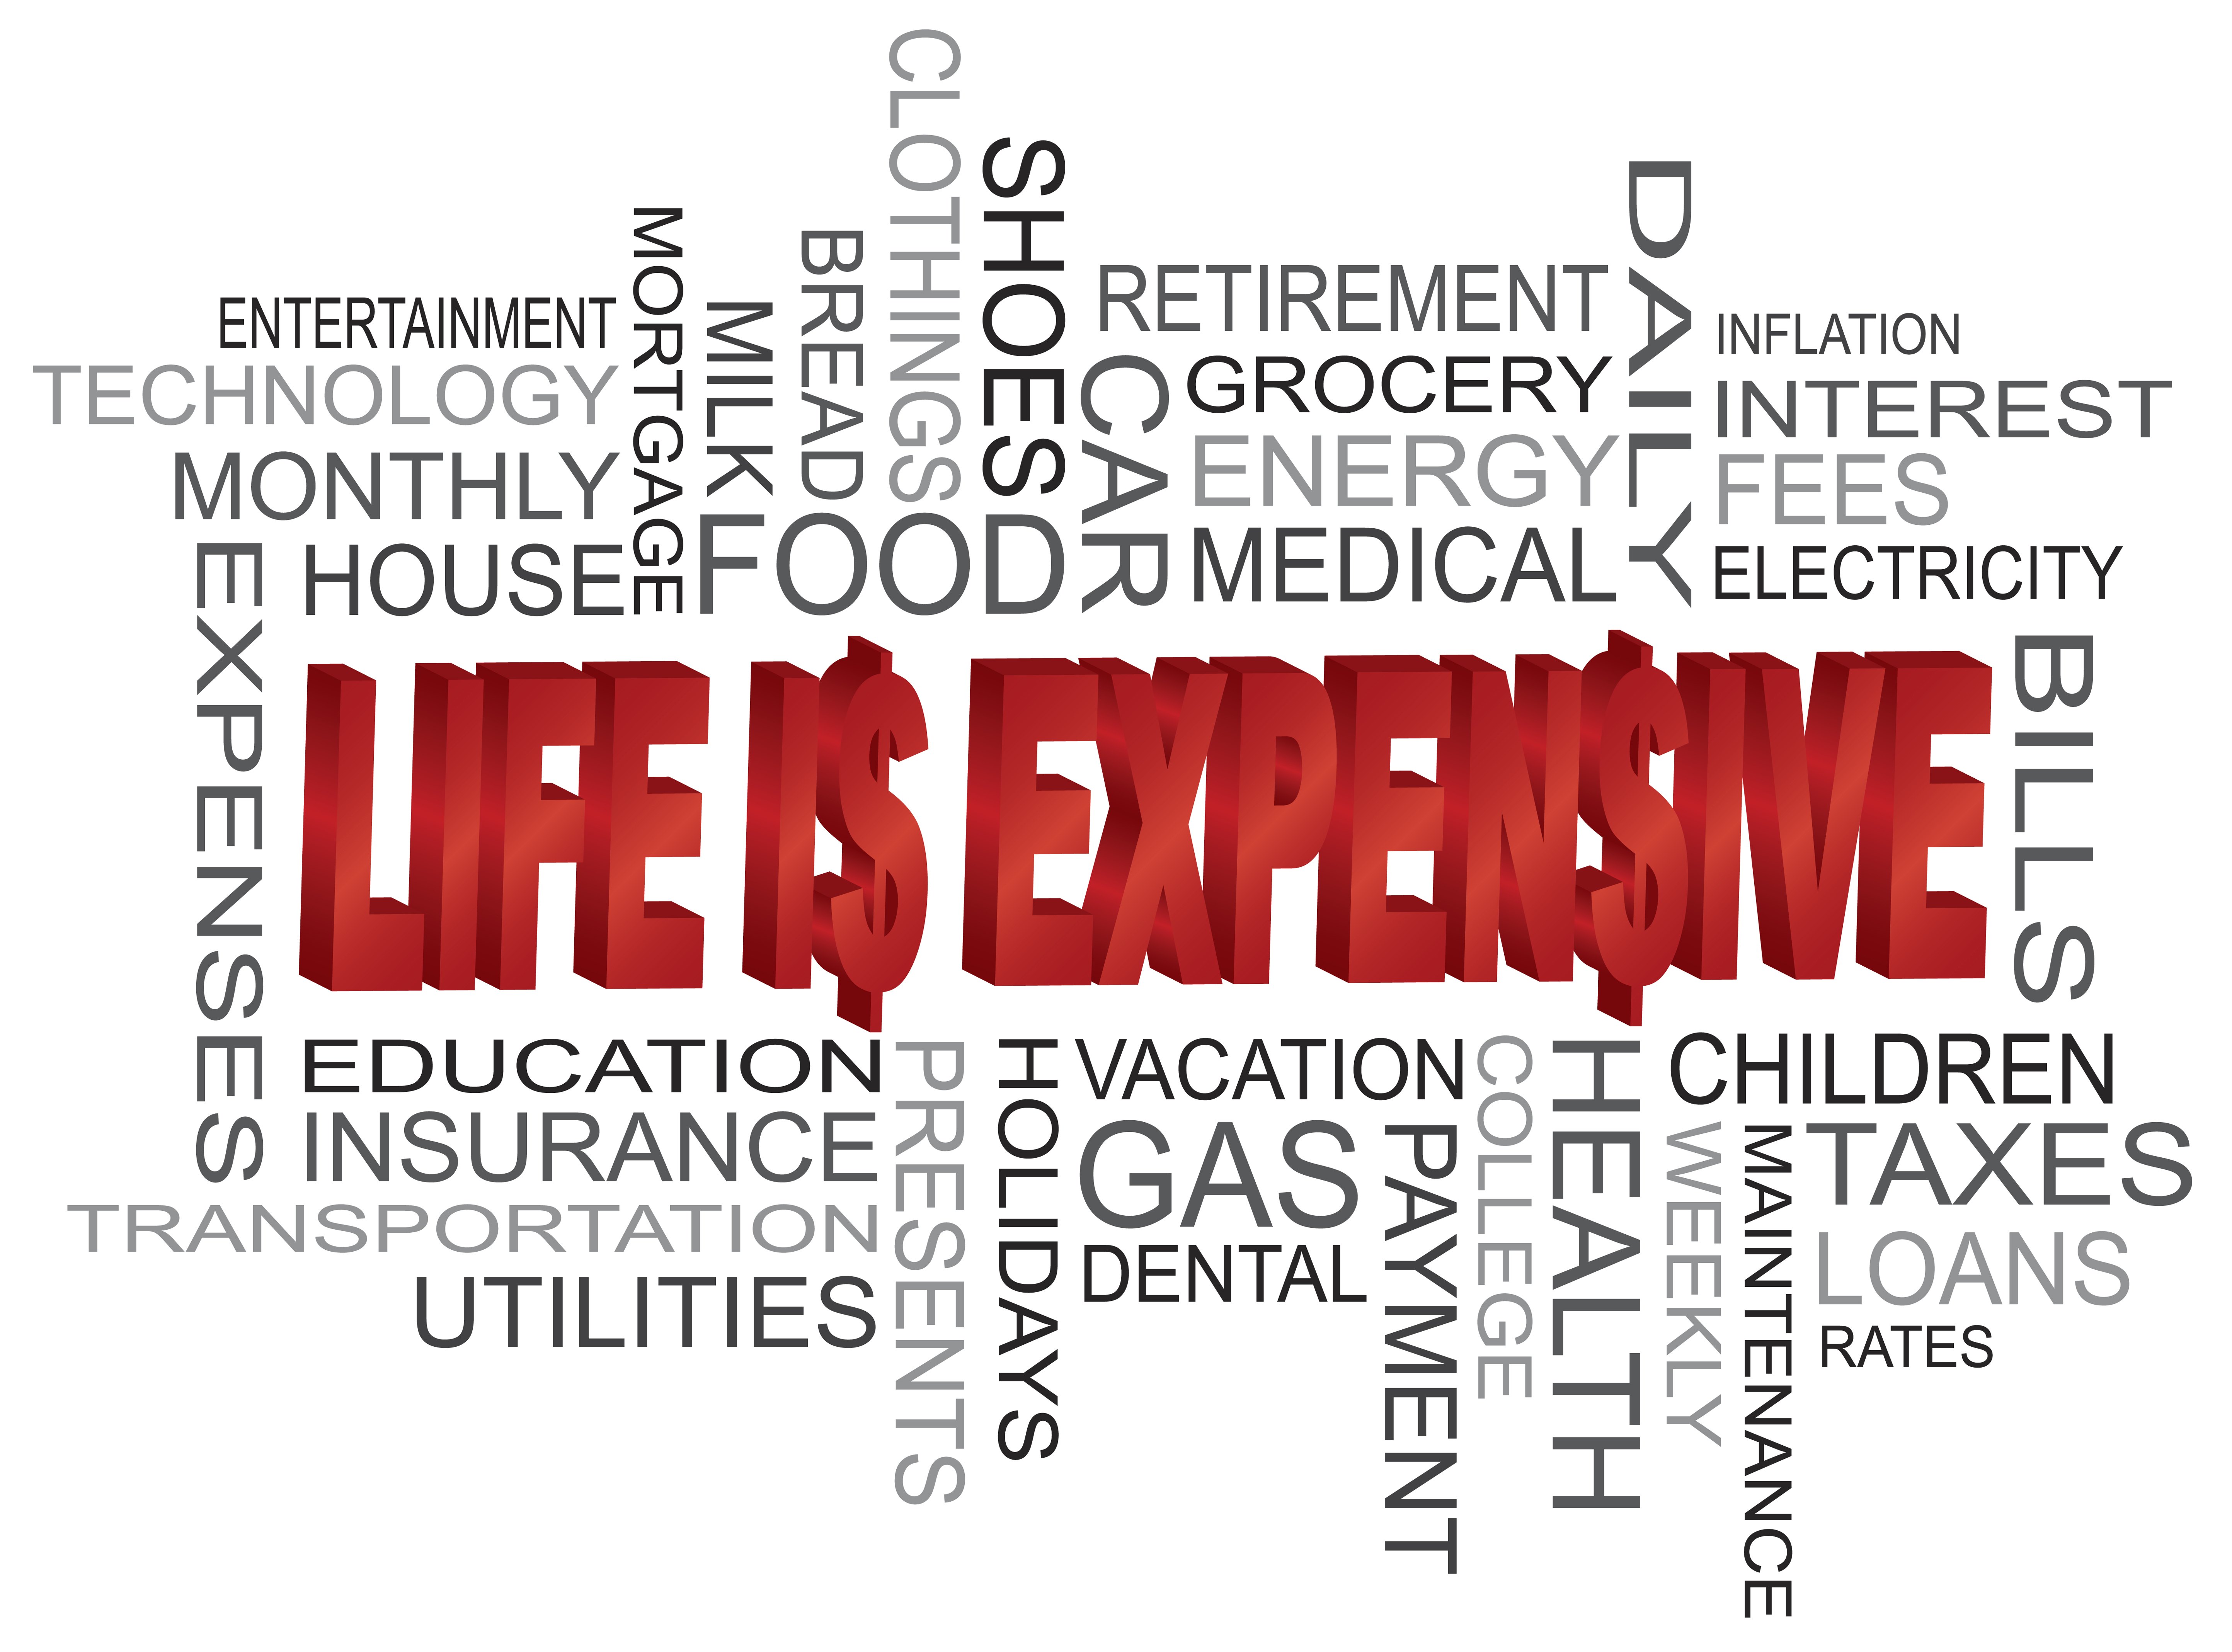 Whole Life Insurance Premiums: How Flexible Are They?